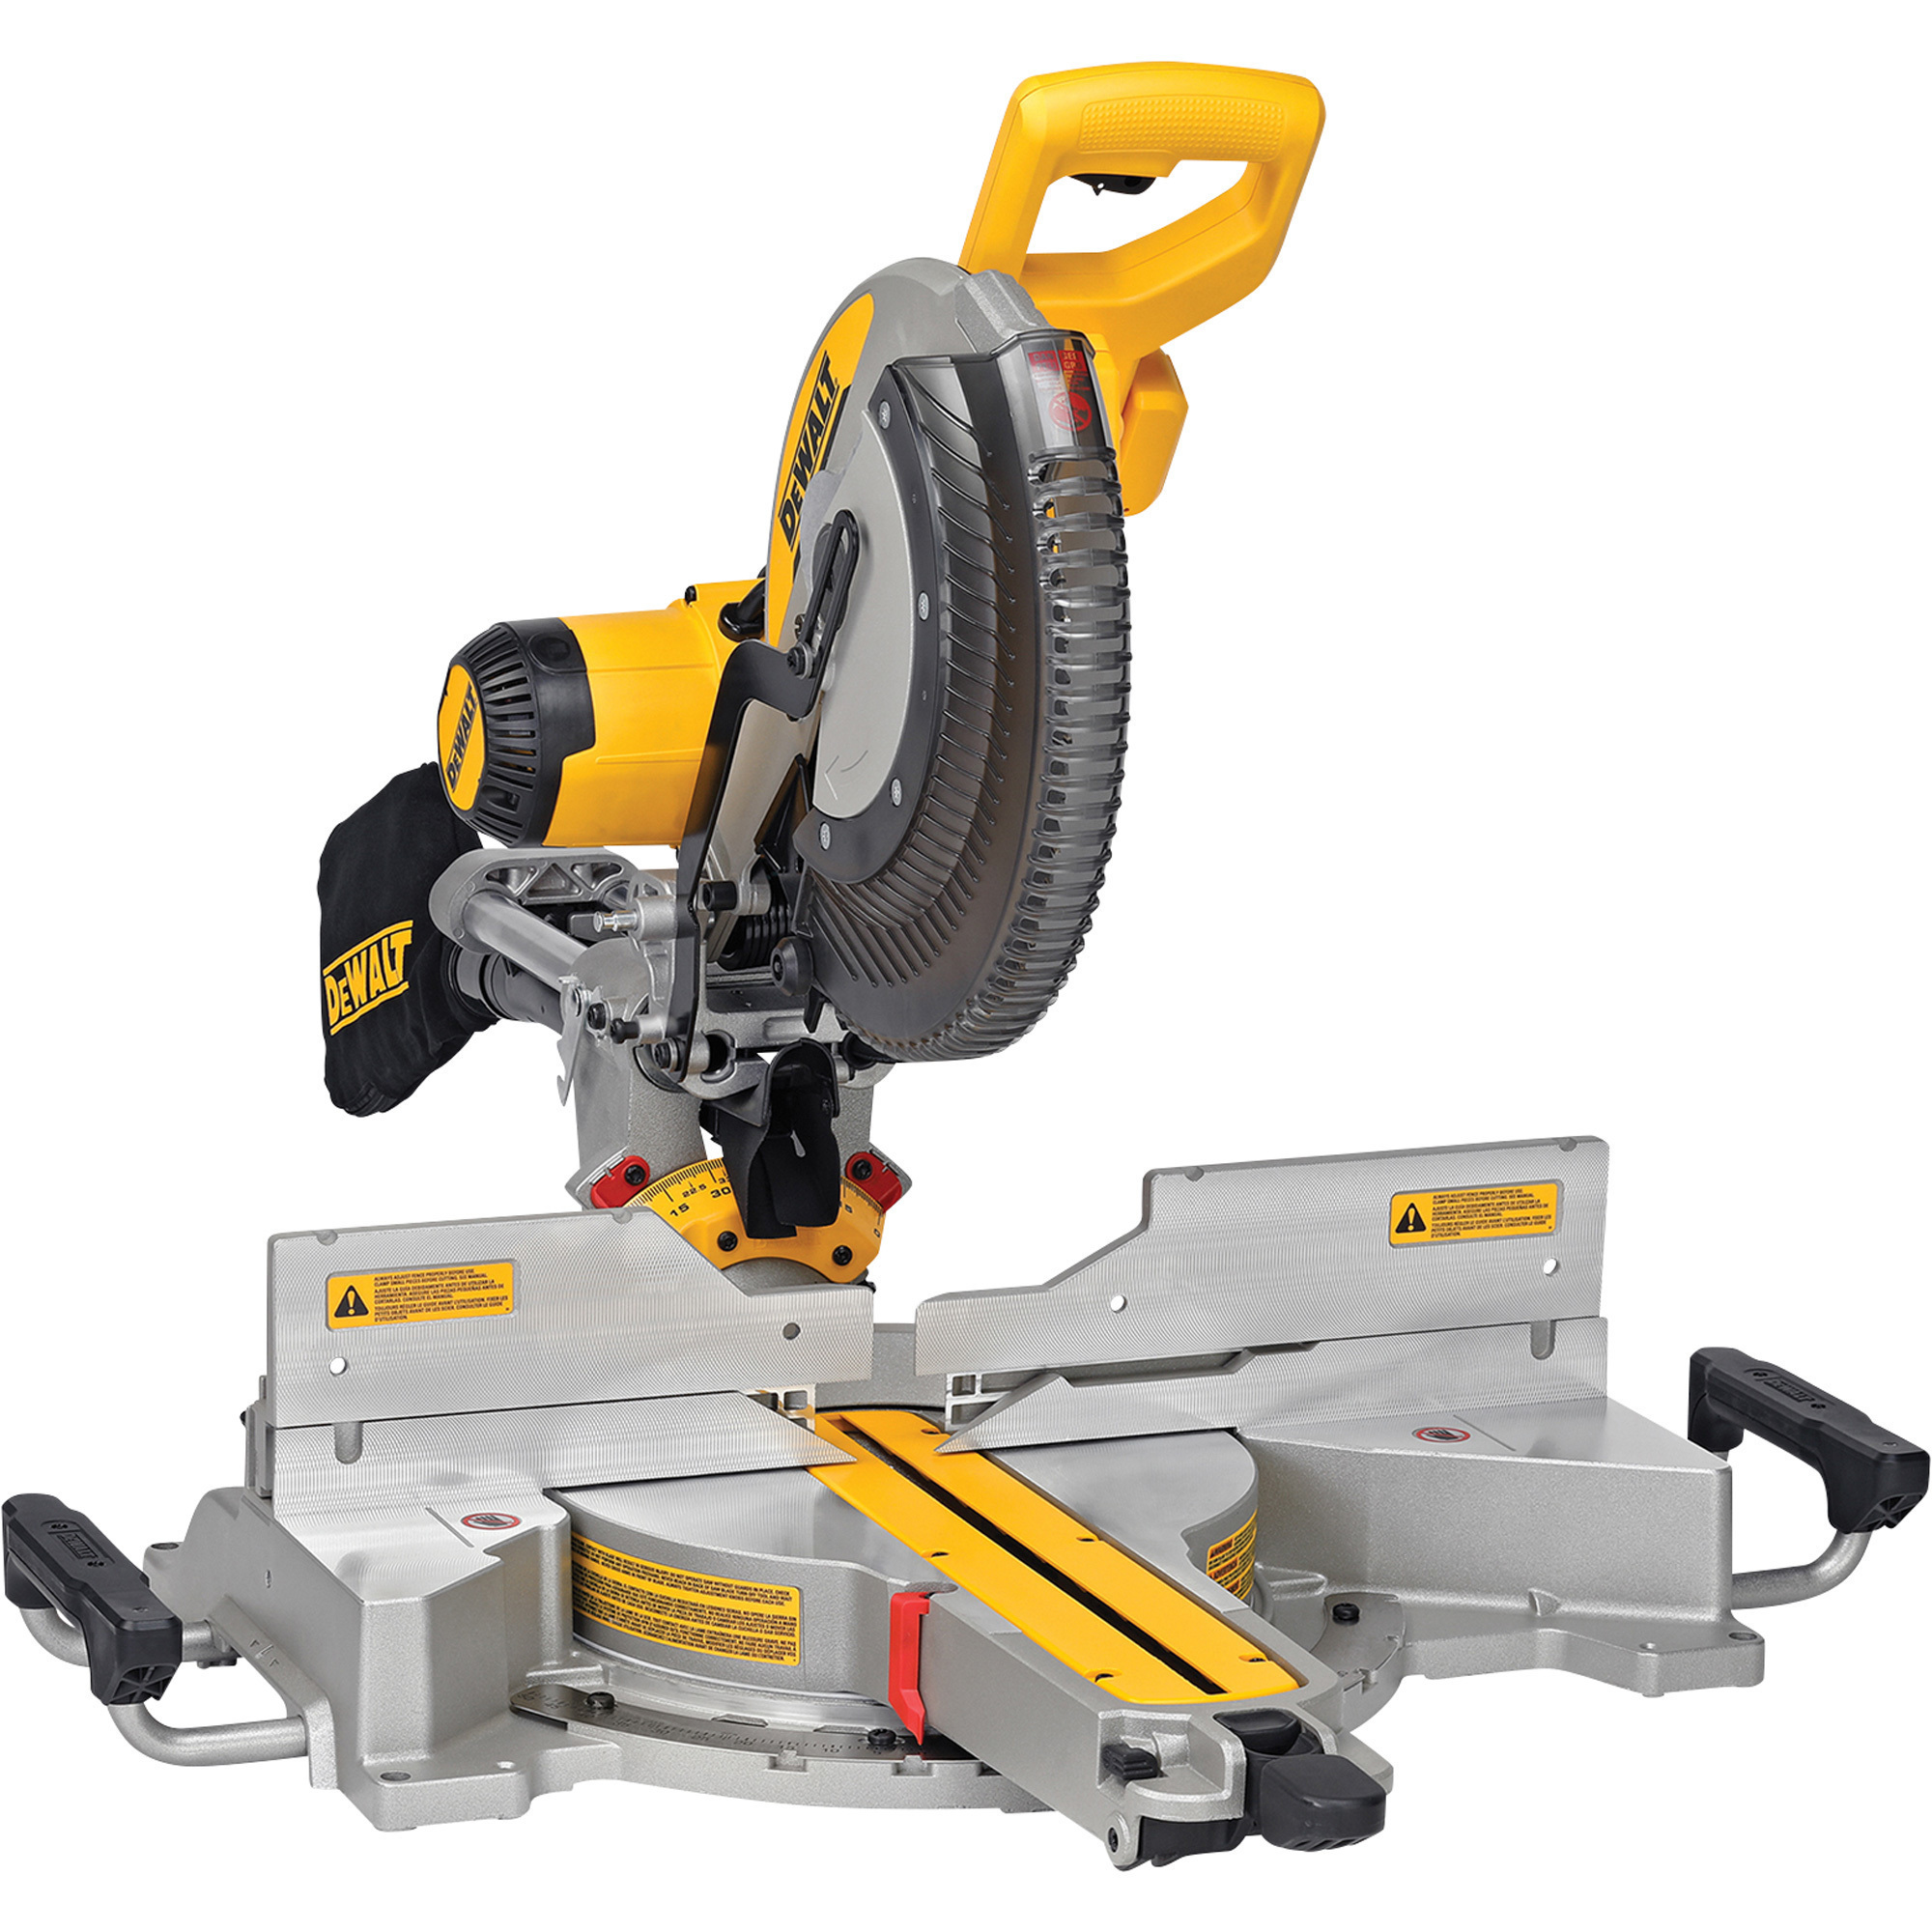 DEWALT 12in. Compound Miter Saw, 15 Amp Motor, Dual XPS Cross-Cutting, DWS780 | Northern Tool